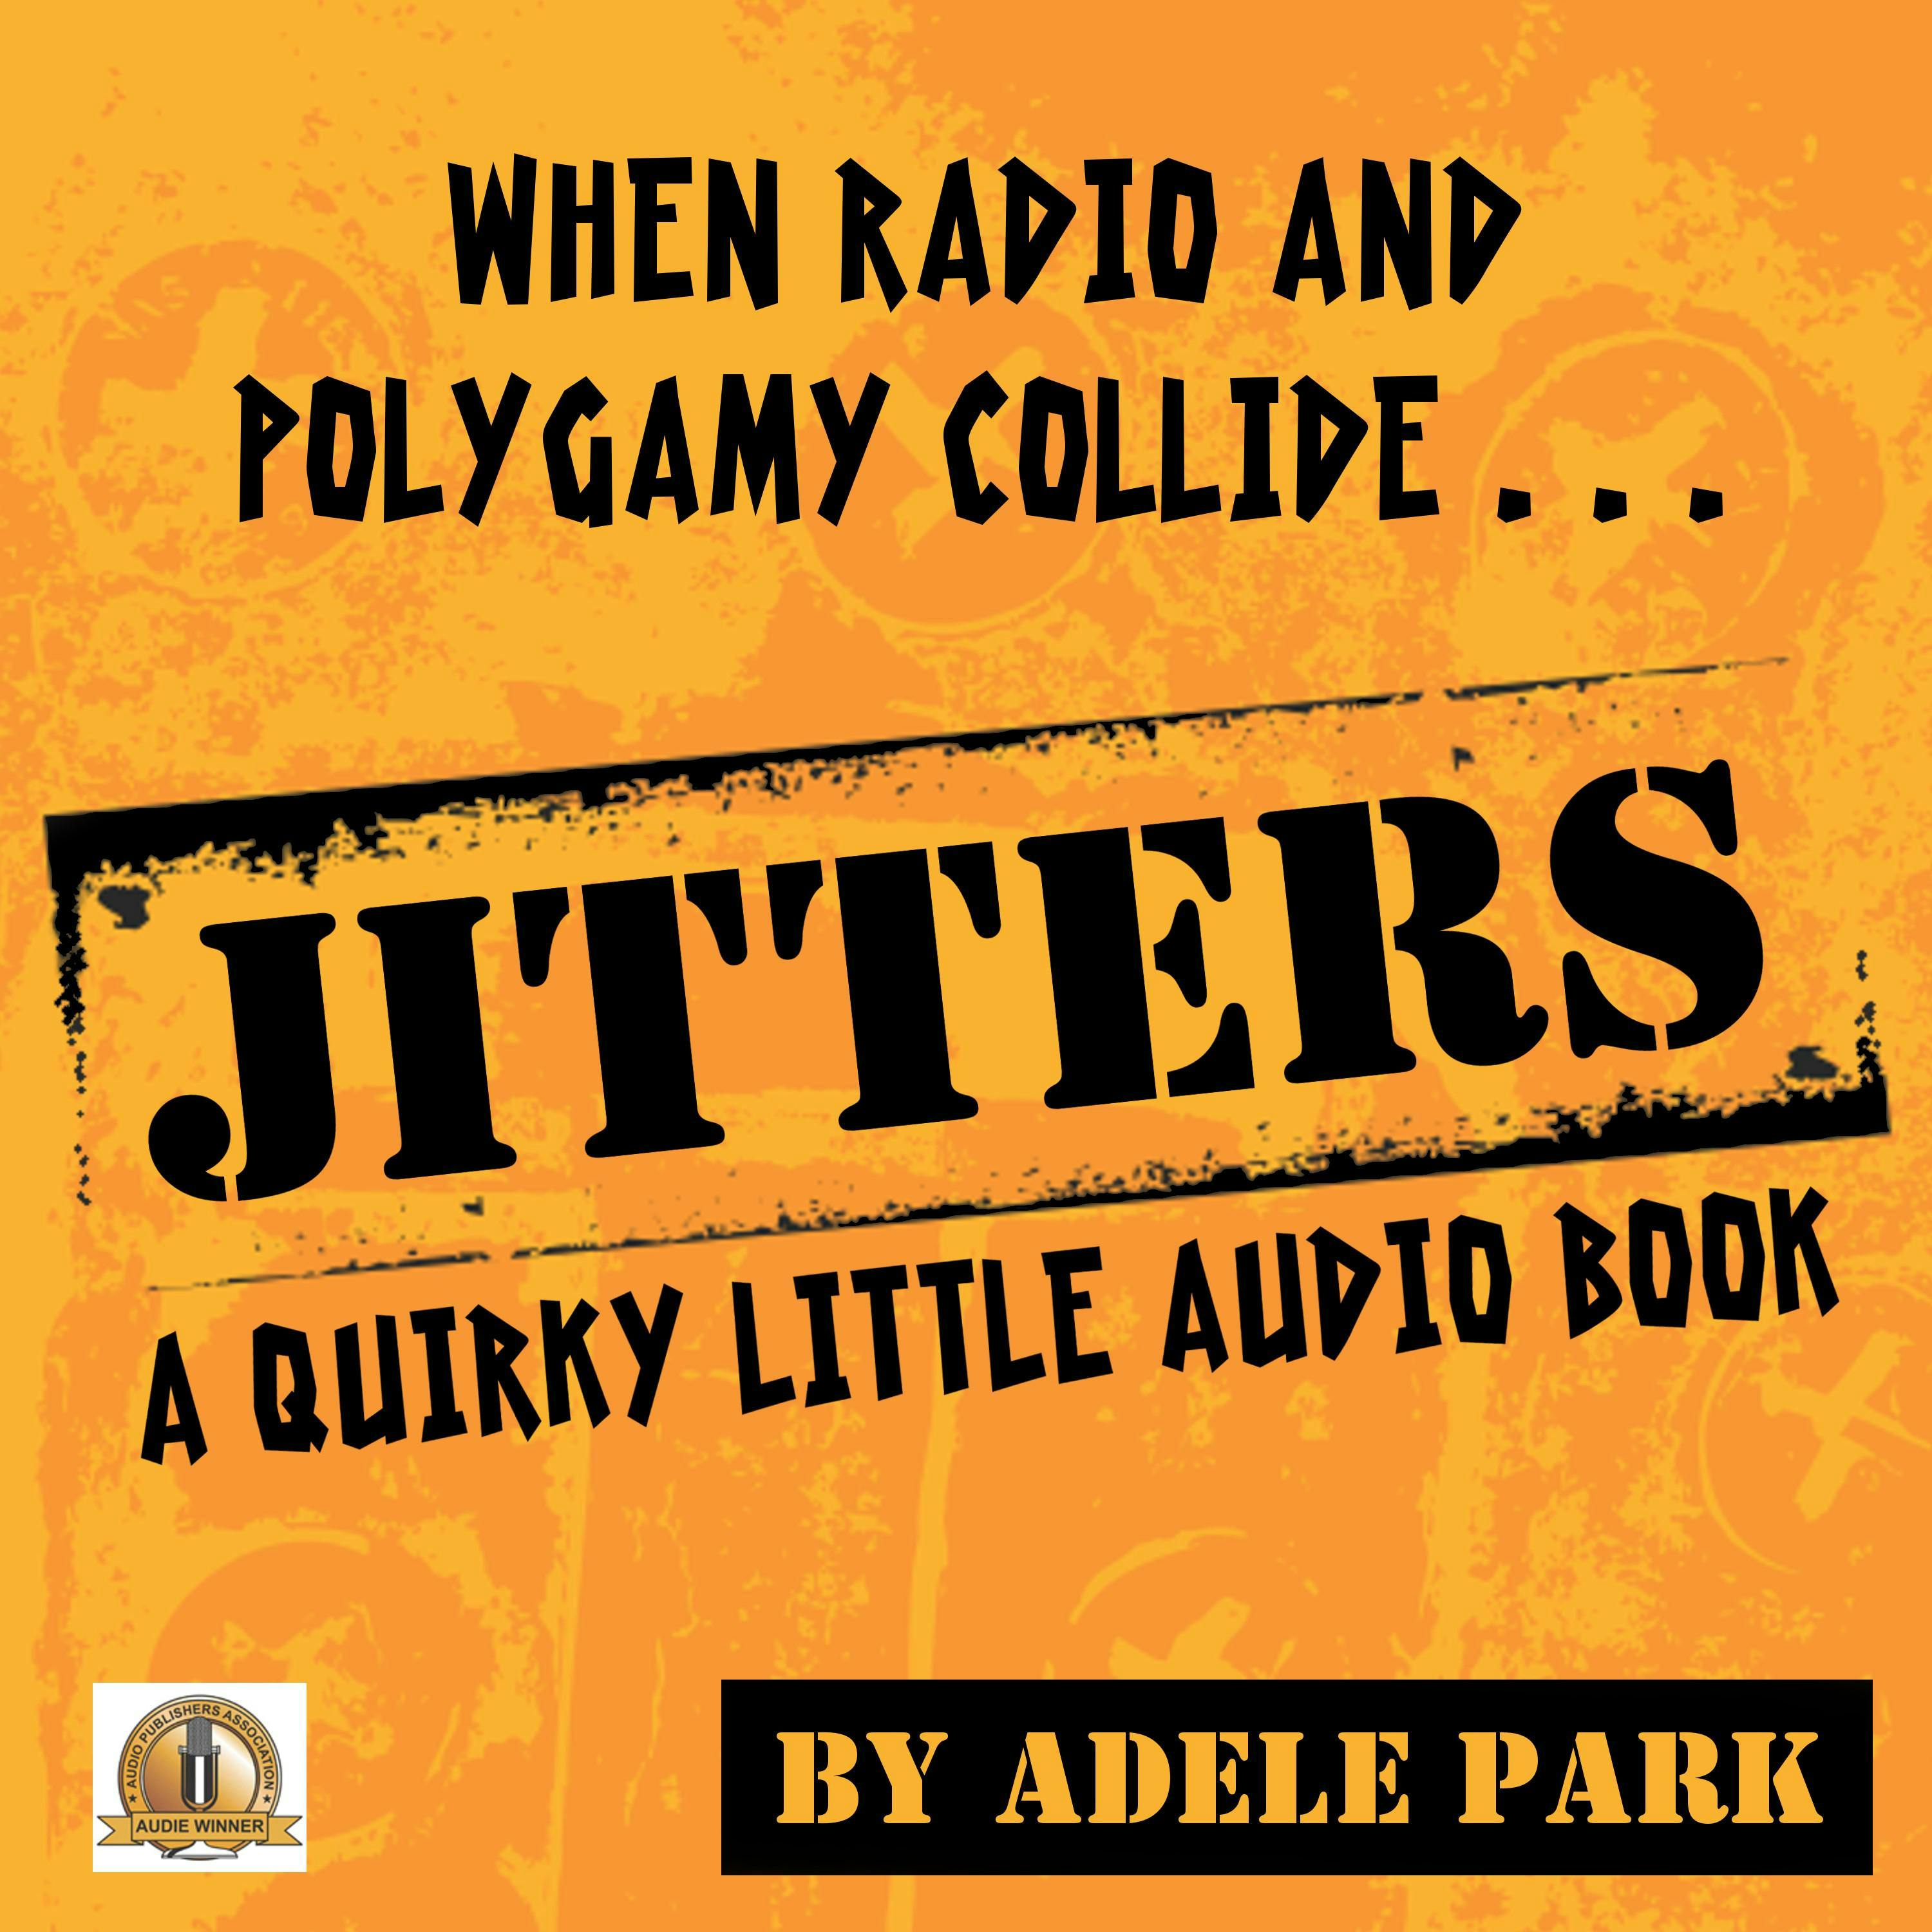 Jitters-A Quirky Little Audio Book: When Radio And Polygamy Collide - Adele Park